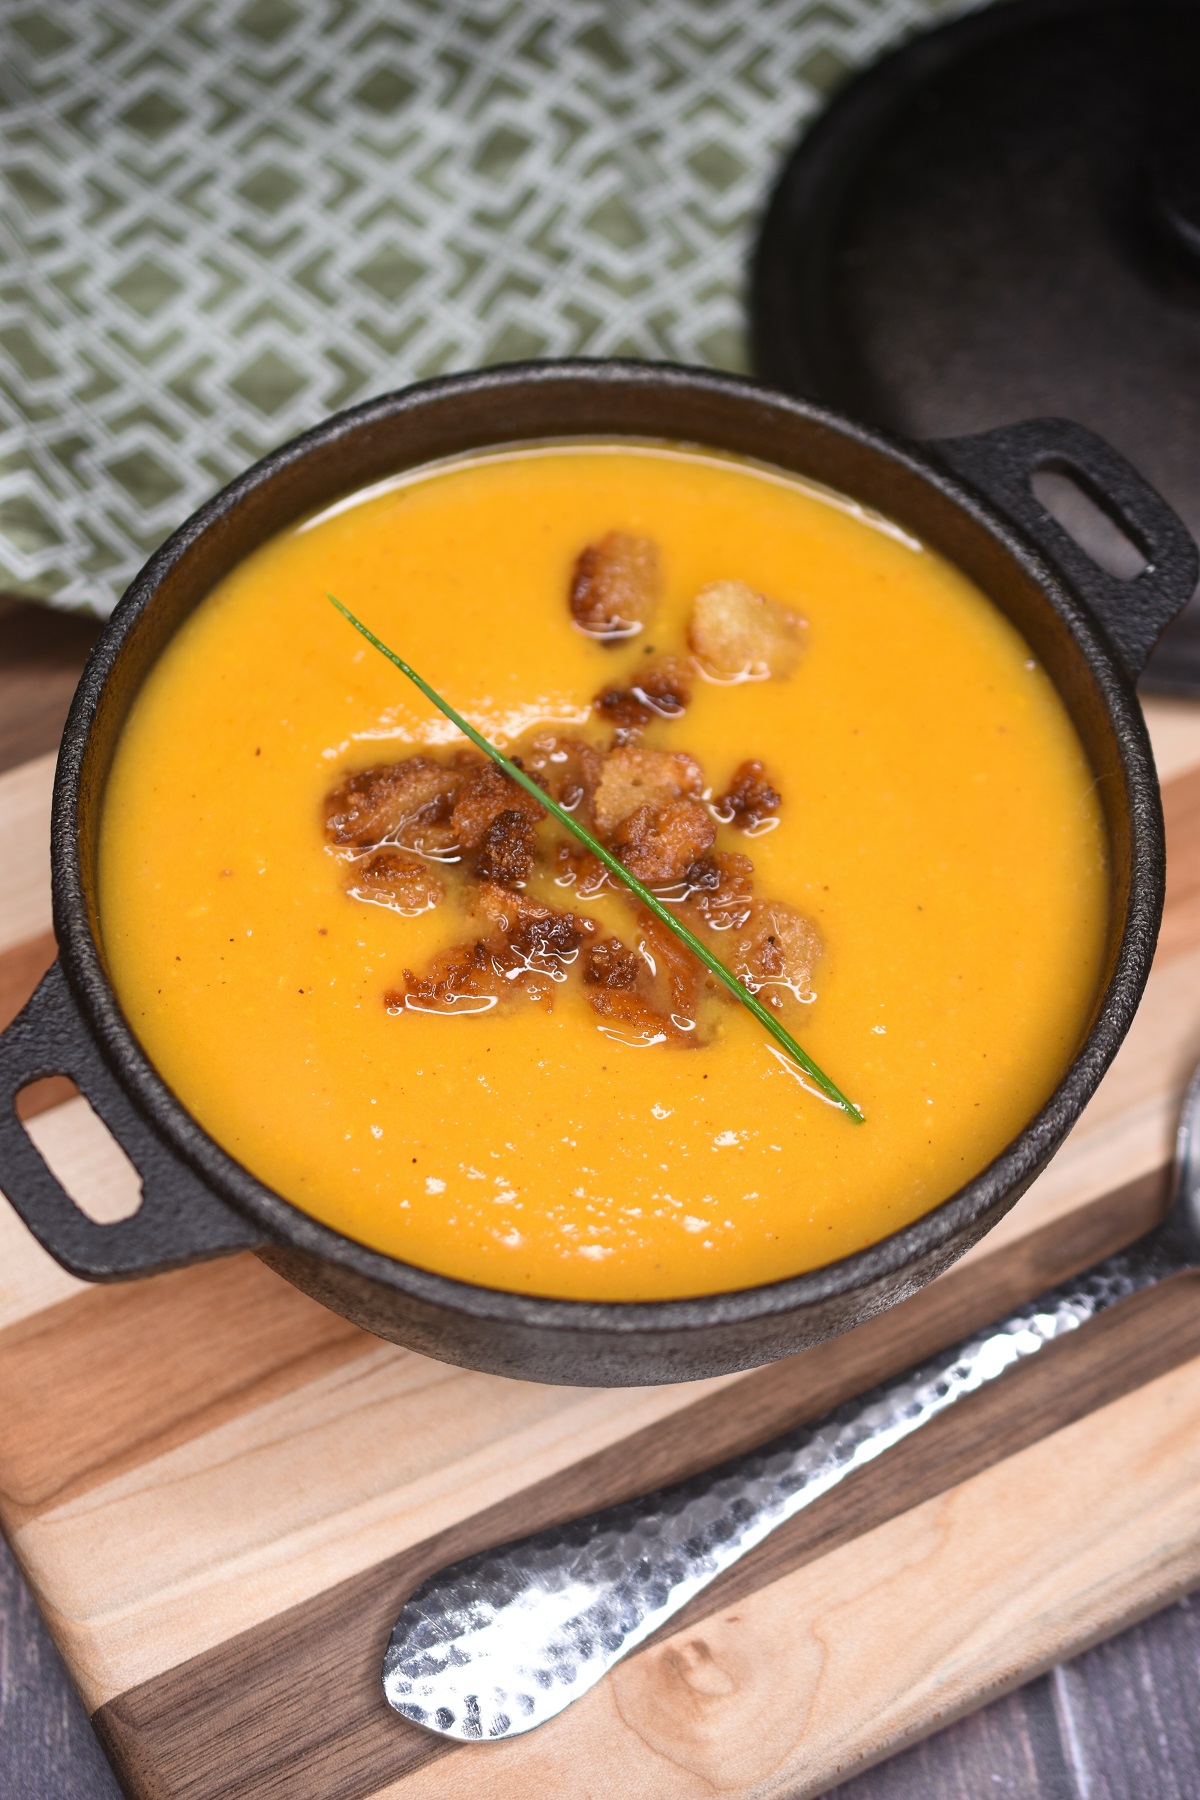 Vegetarian Sweet Potato Soup Recipe with Spiced Crouton Crumble